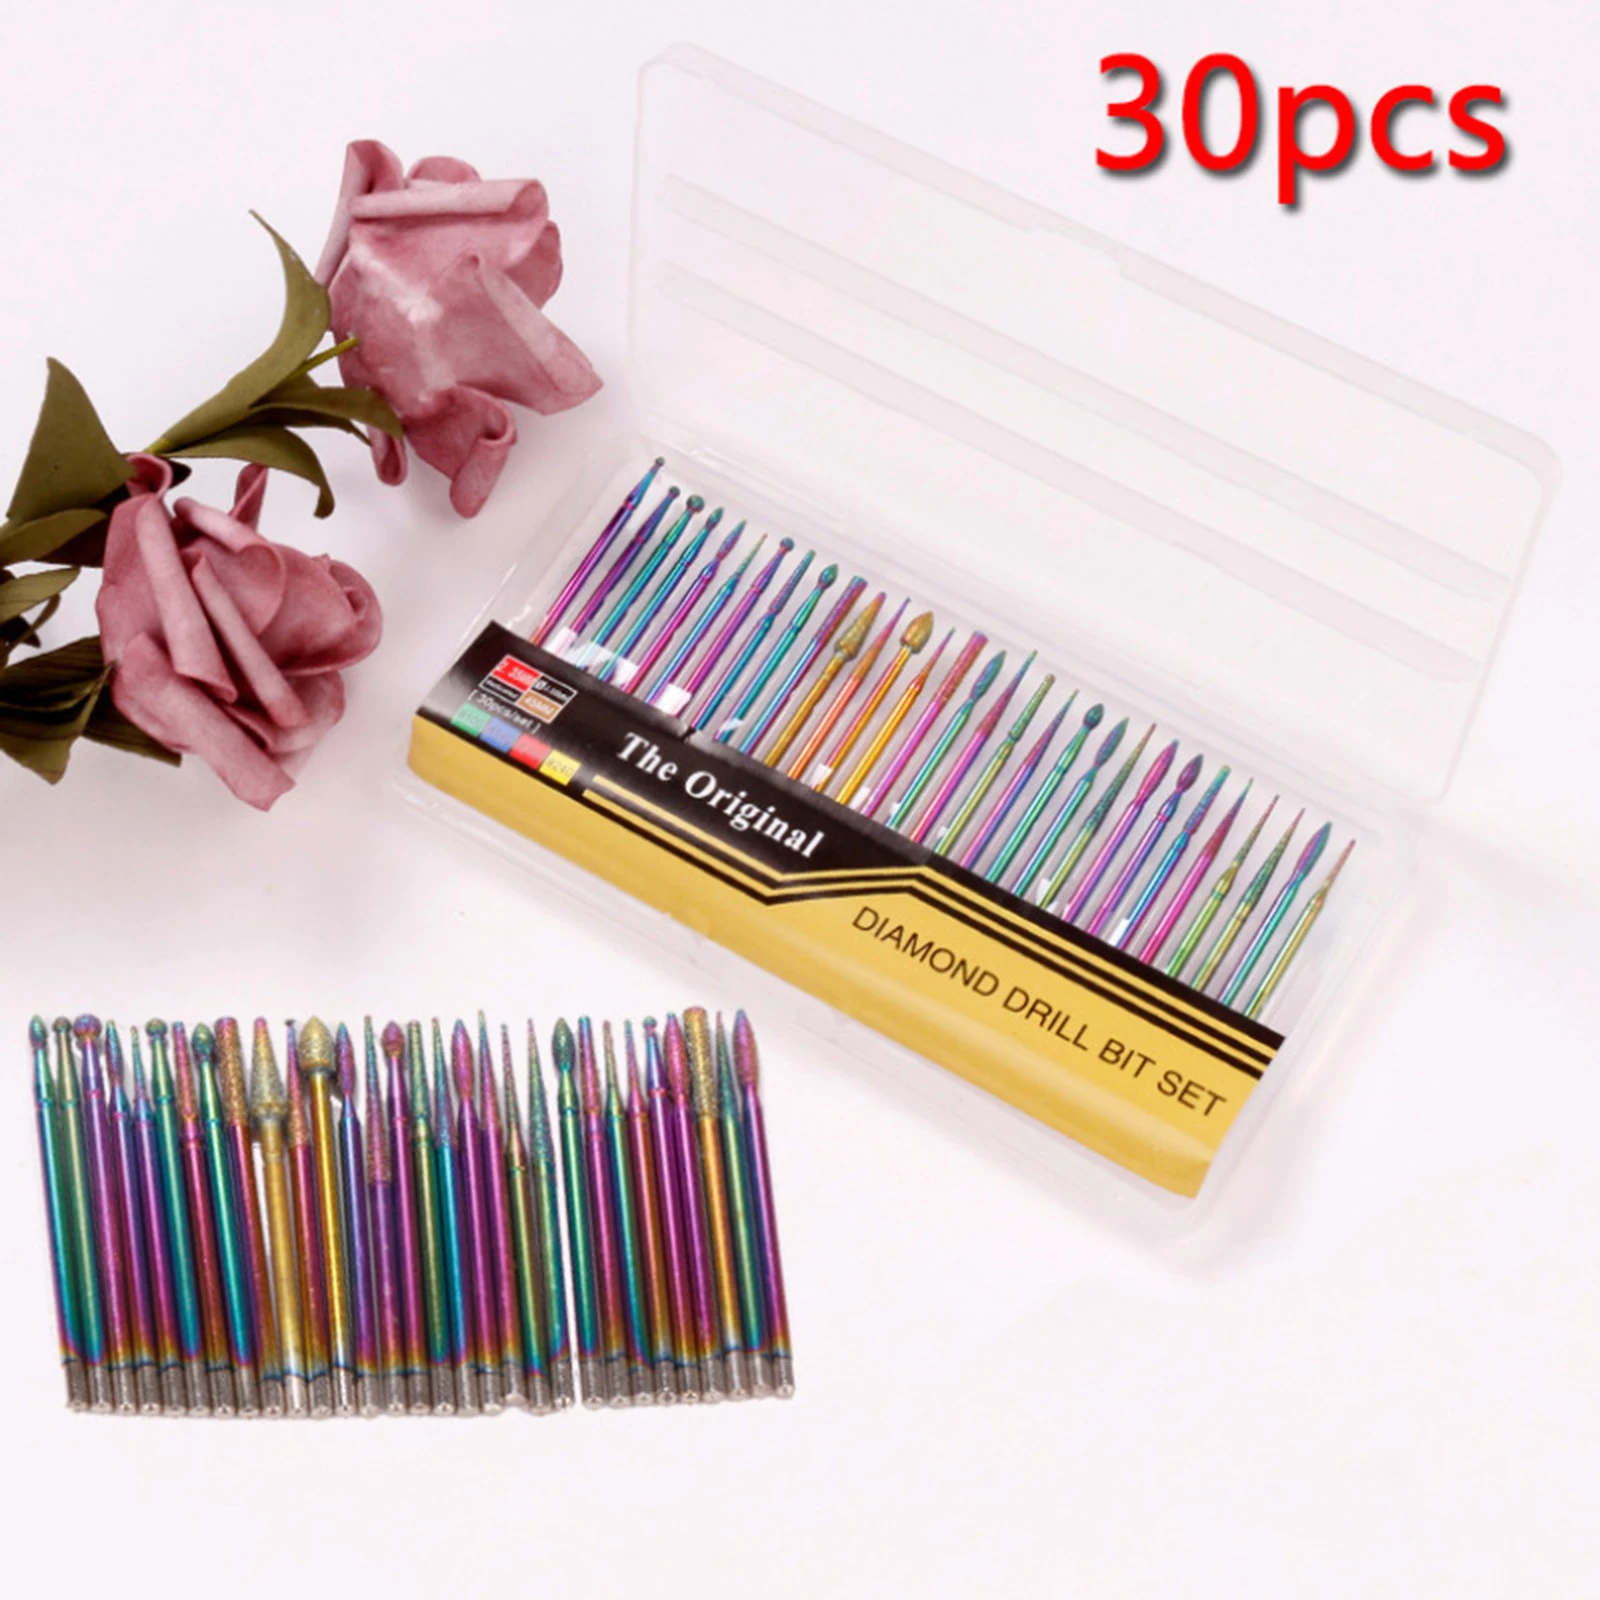 Nail Drill Burr Bits Colorful Milling Cutter Bit Manicure Pedicure Tools Professional Nail Files Accessories for Salon SPA